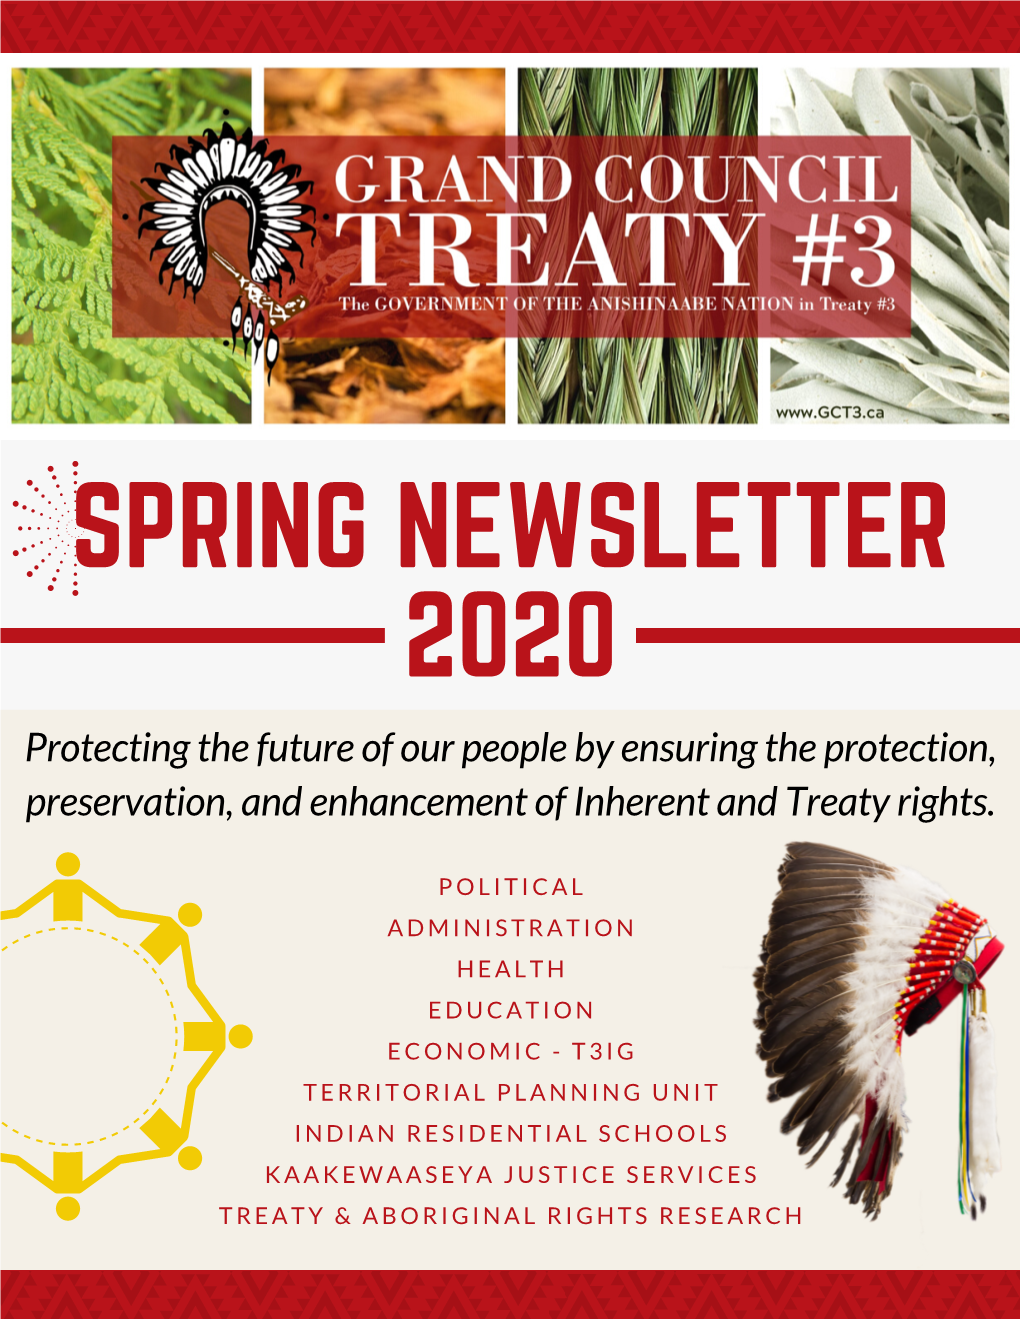 SPRING NEWSLETTER 2020 Protecting the Future of Our People by Ensuring the Protection, Preservation, and Enhancement of Inherent and Treaty Rights